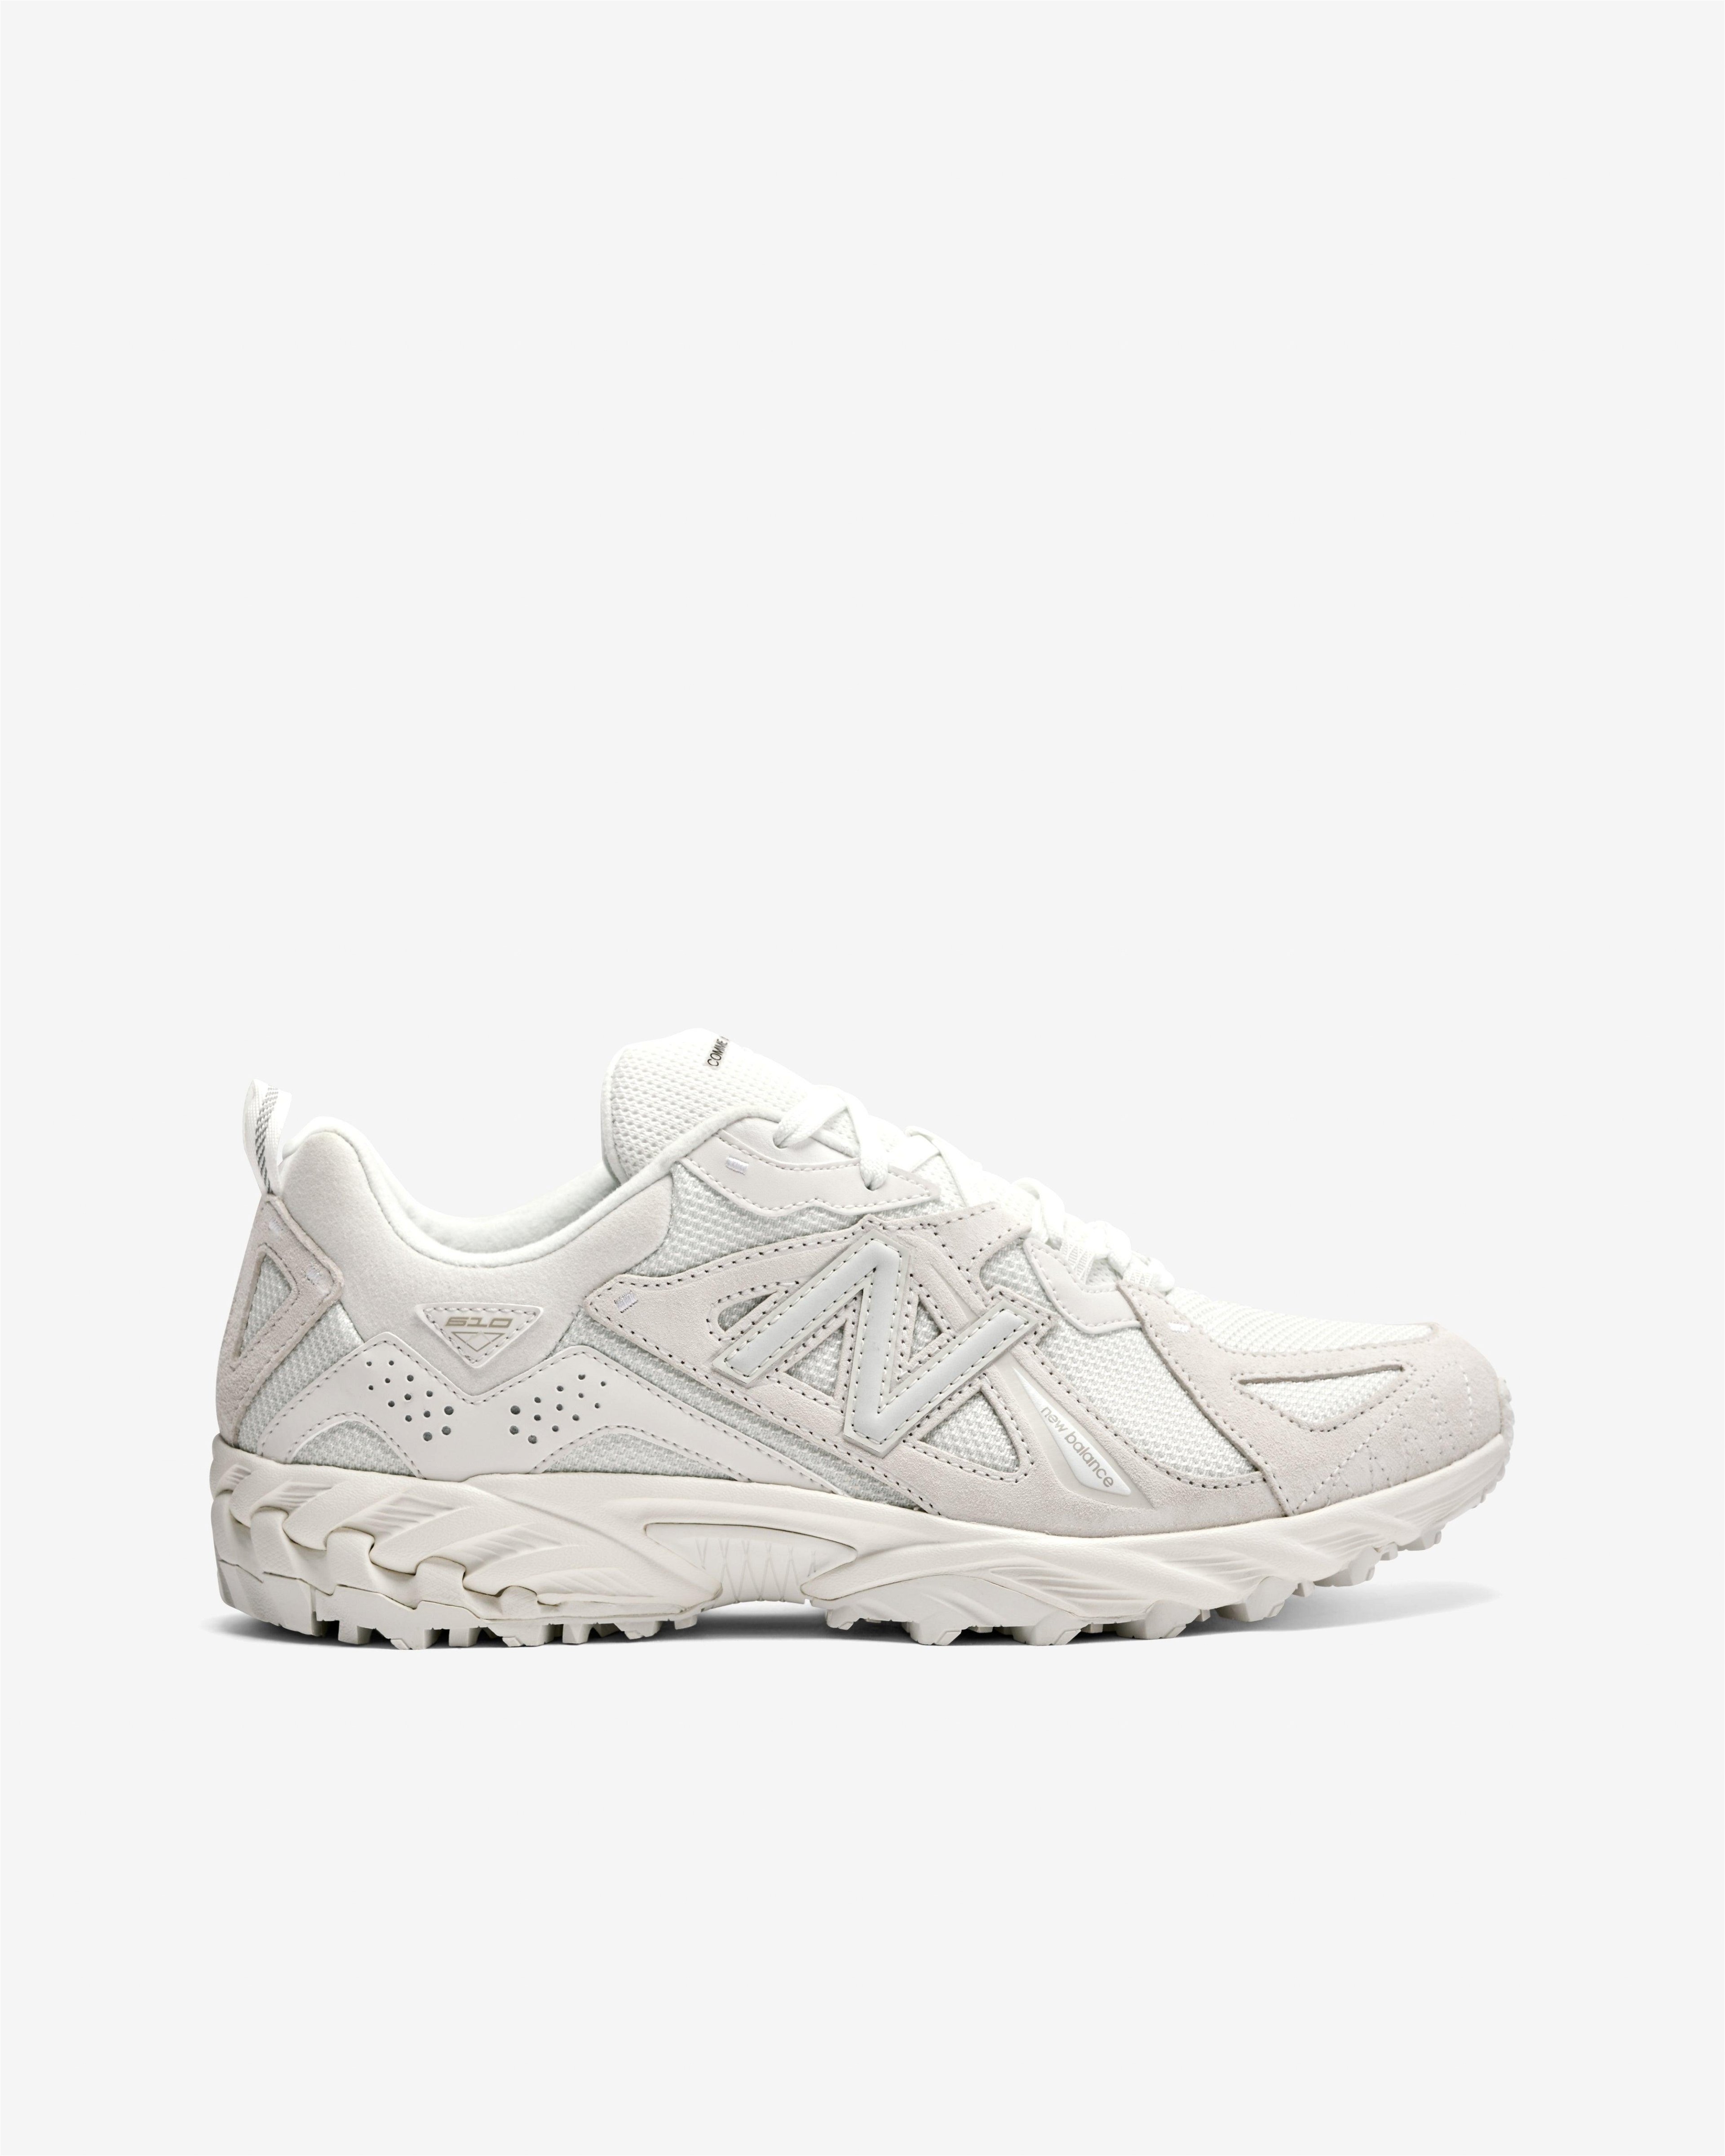 Comme des Garçons Homme - New Balance ML610TCG Sneakers - (White) by HOMME